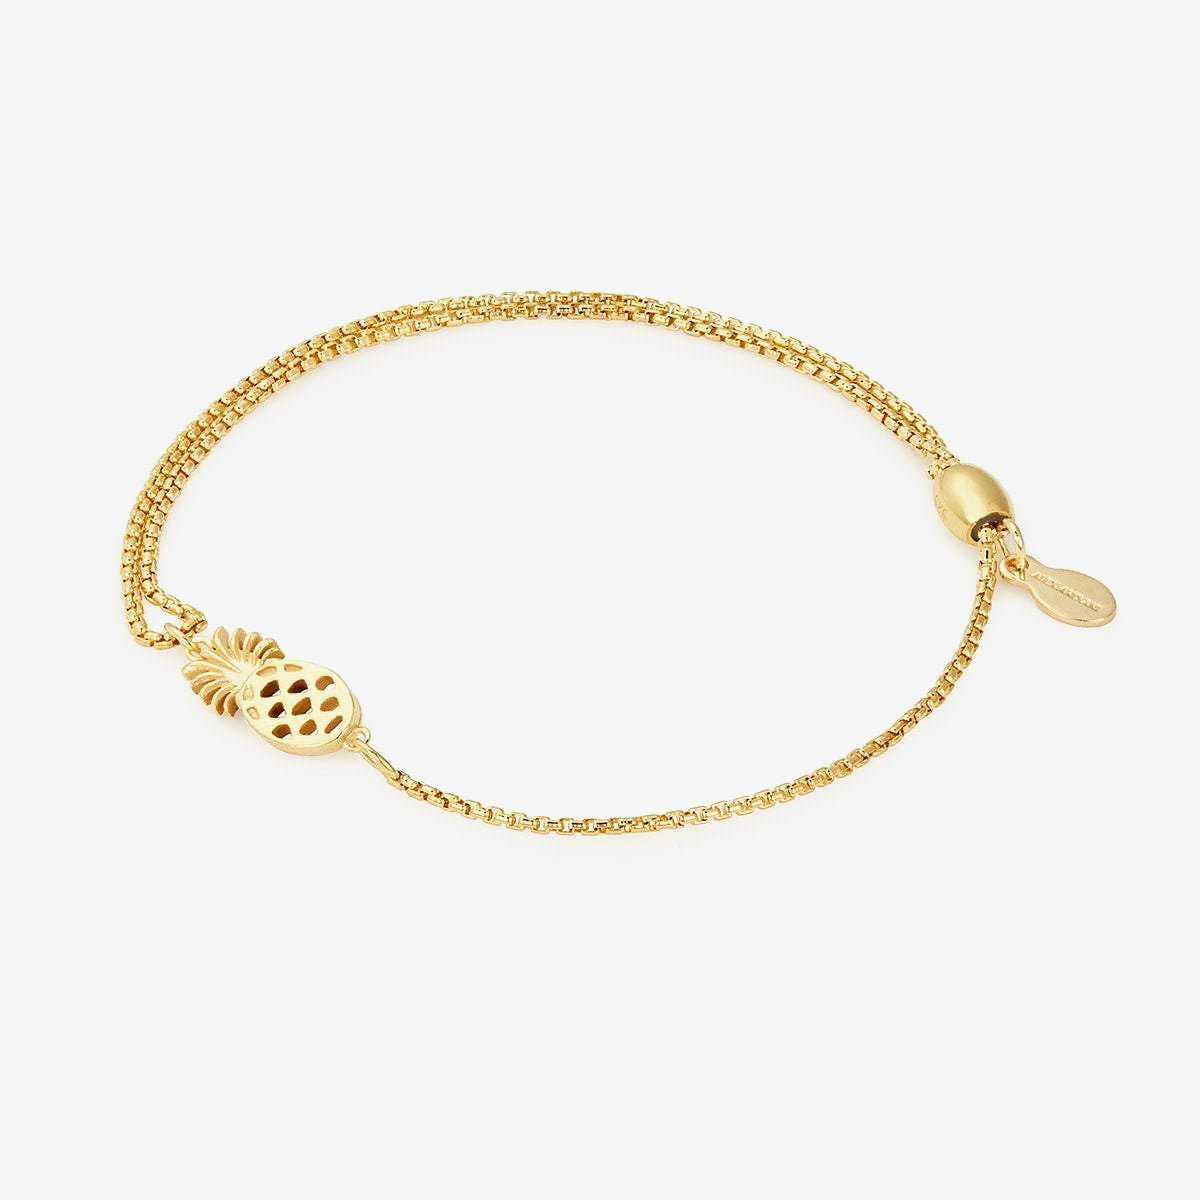 Details about  / Brand New Golden Pineapple Anklet